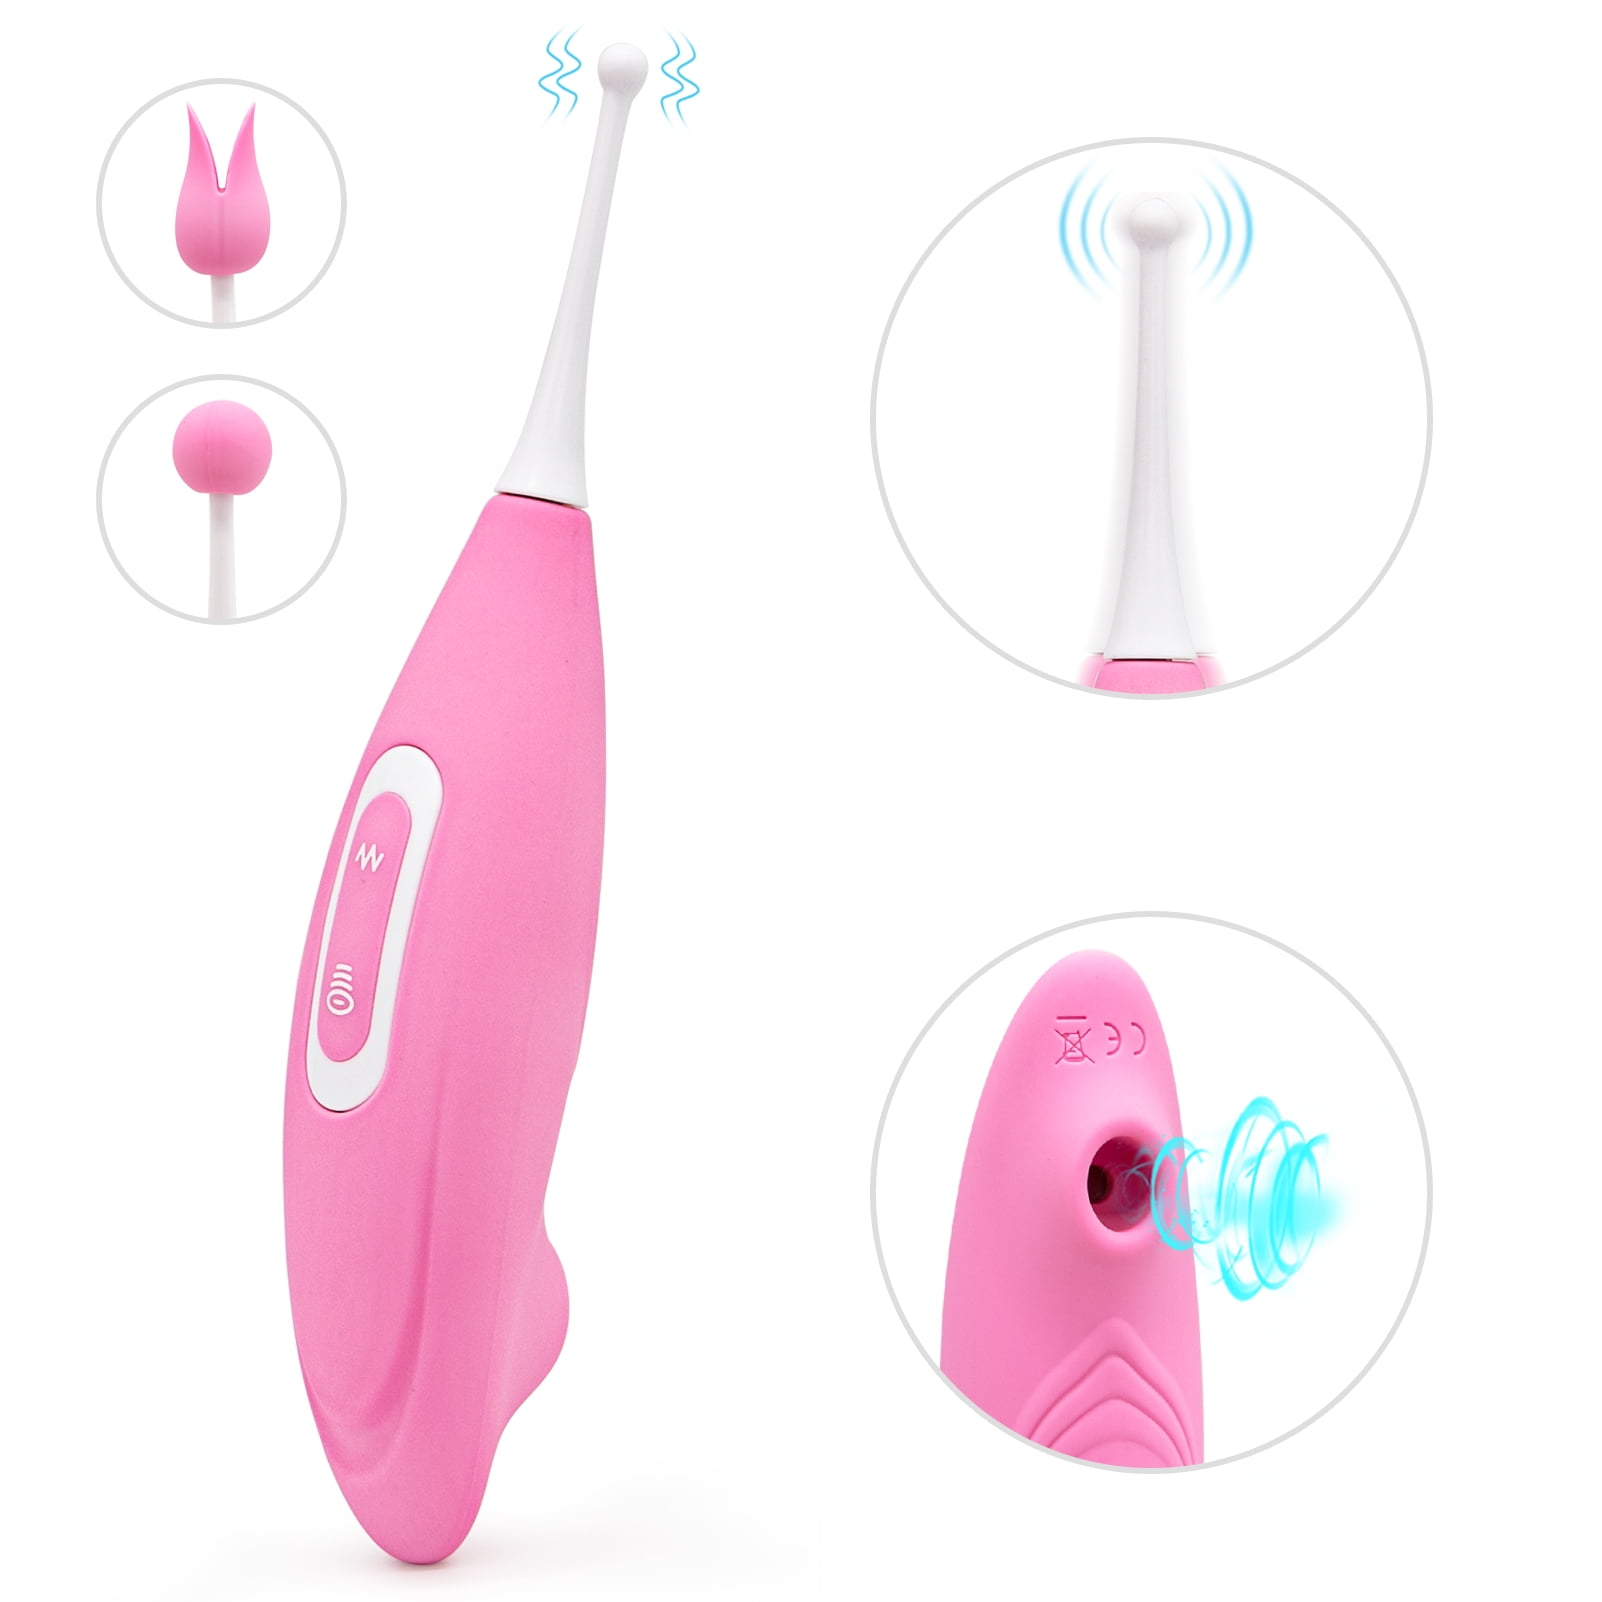 Clitoral Stimulation Vibrator for Women, Vibrating Sucking Small Clitoris Stimulator Clitoral Sex Adult Toys for Couples Woman Female Vibrator Massager